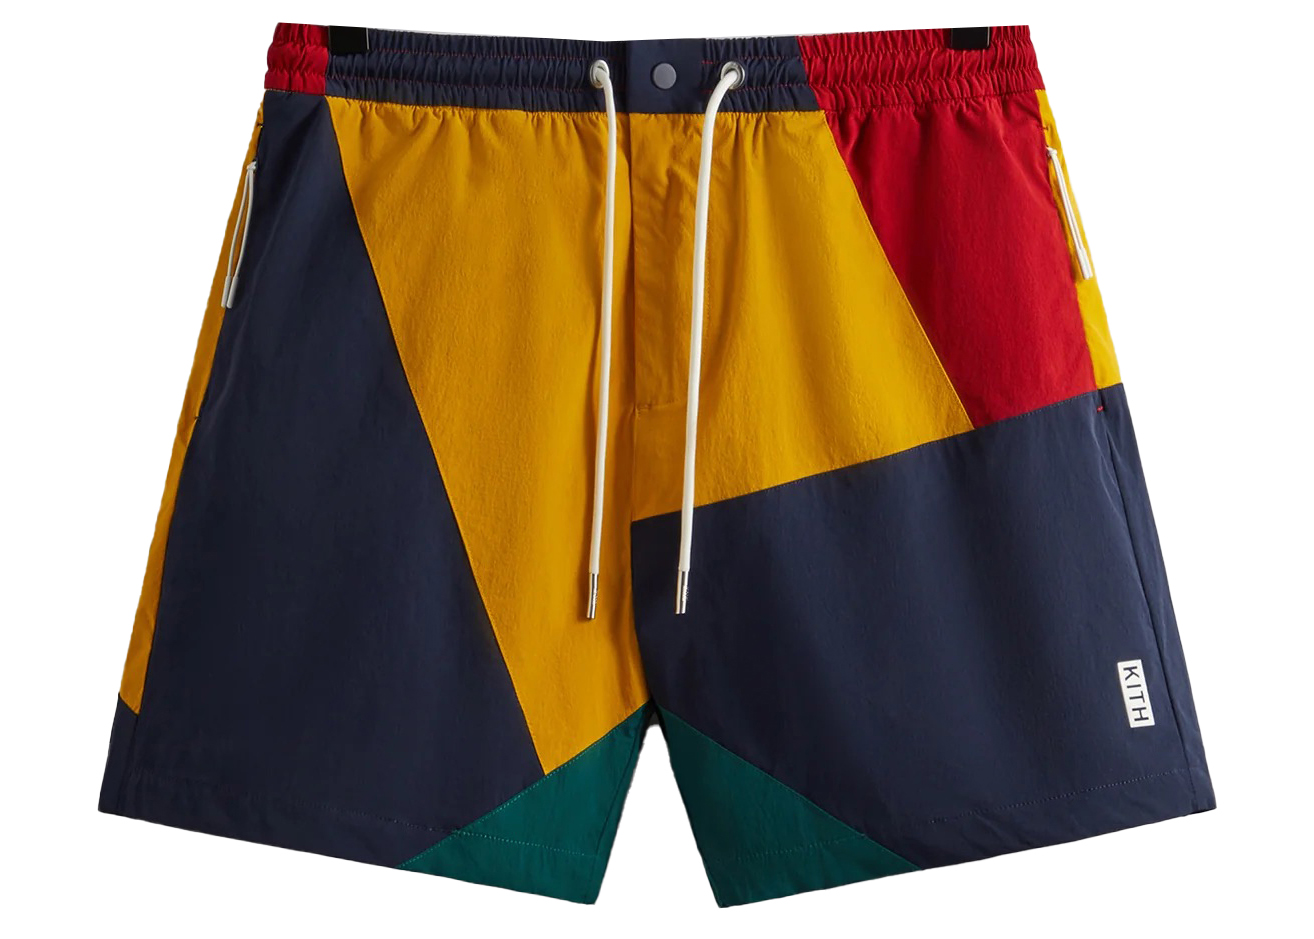 Kith Madison Short Nocturnal